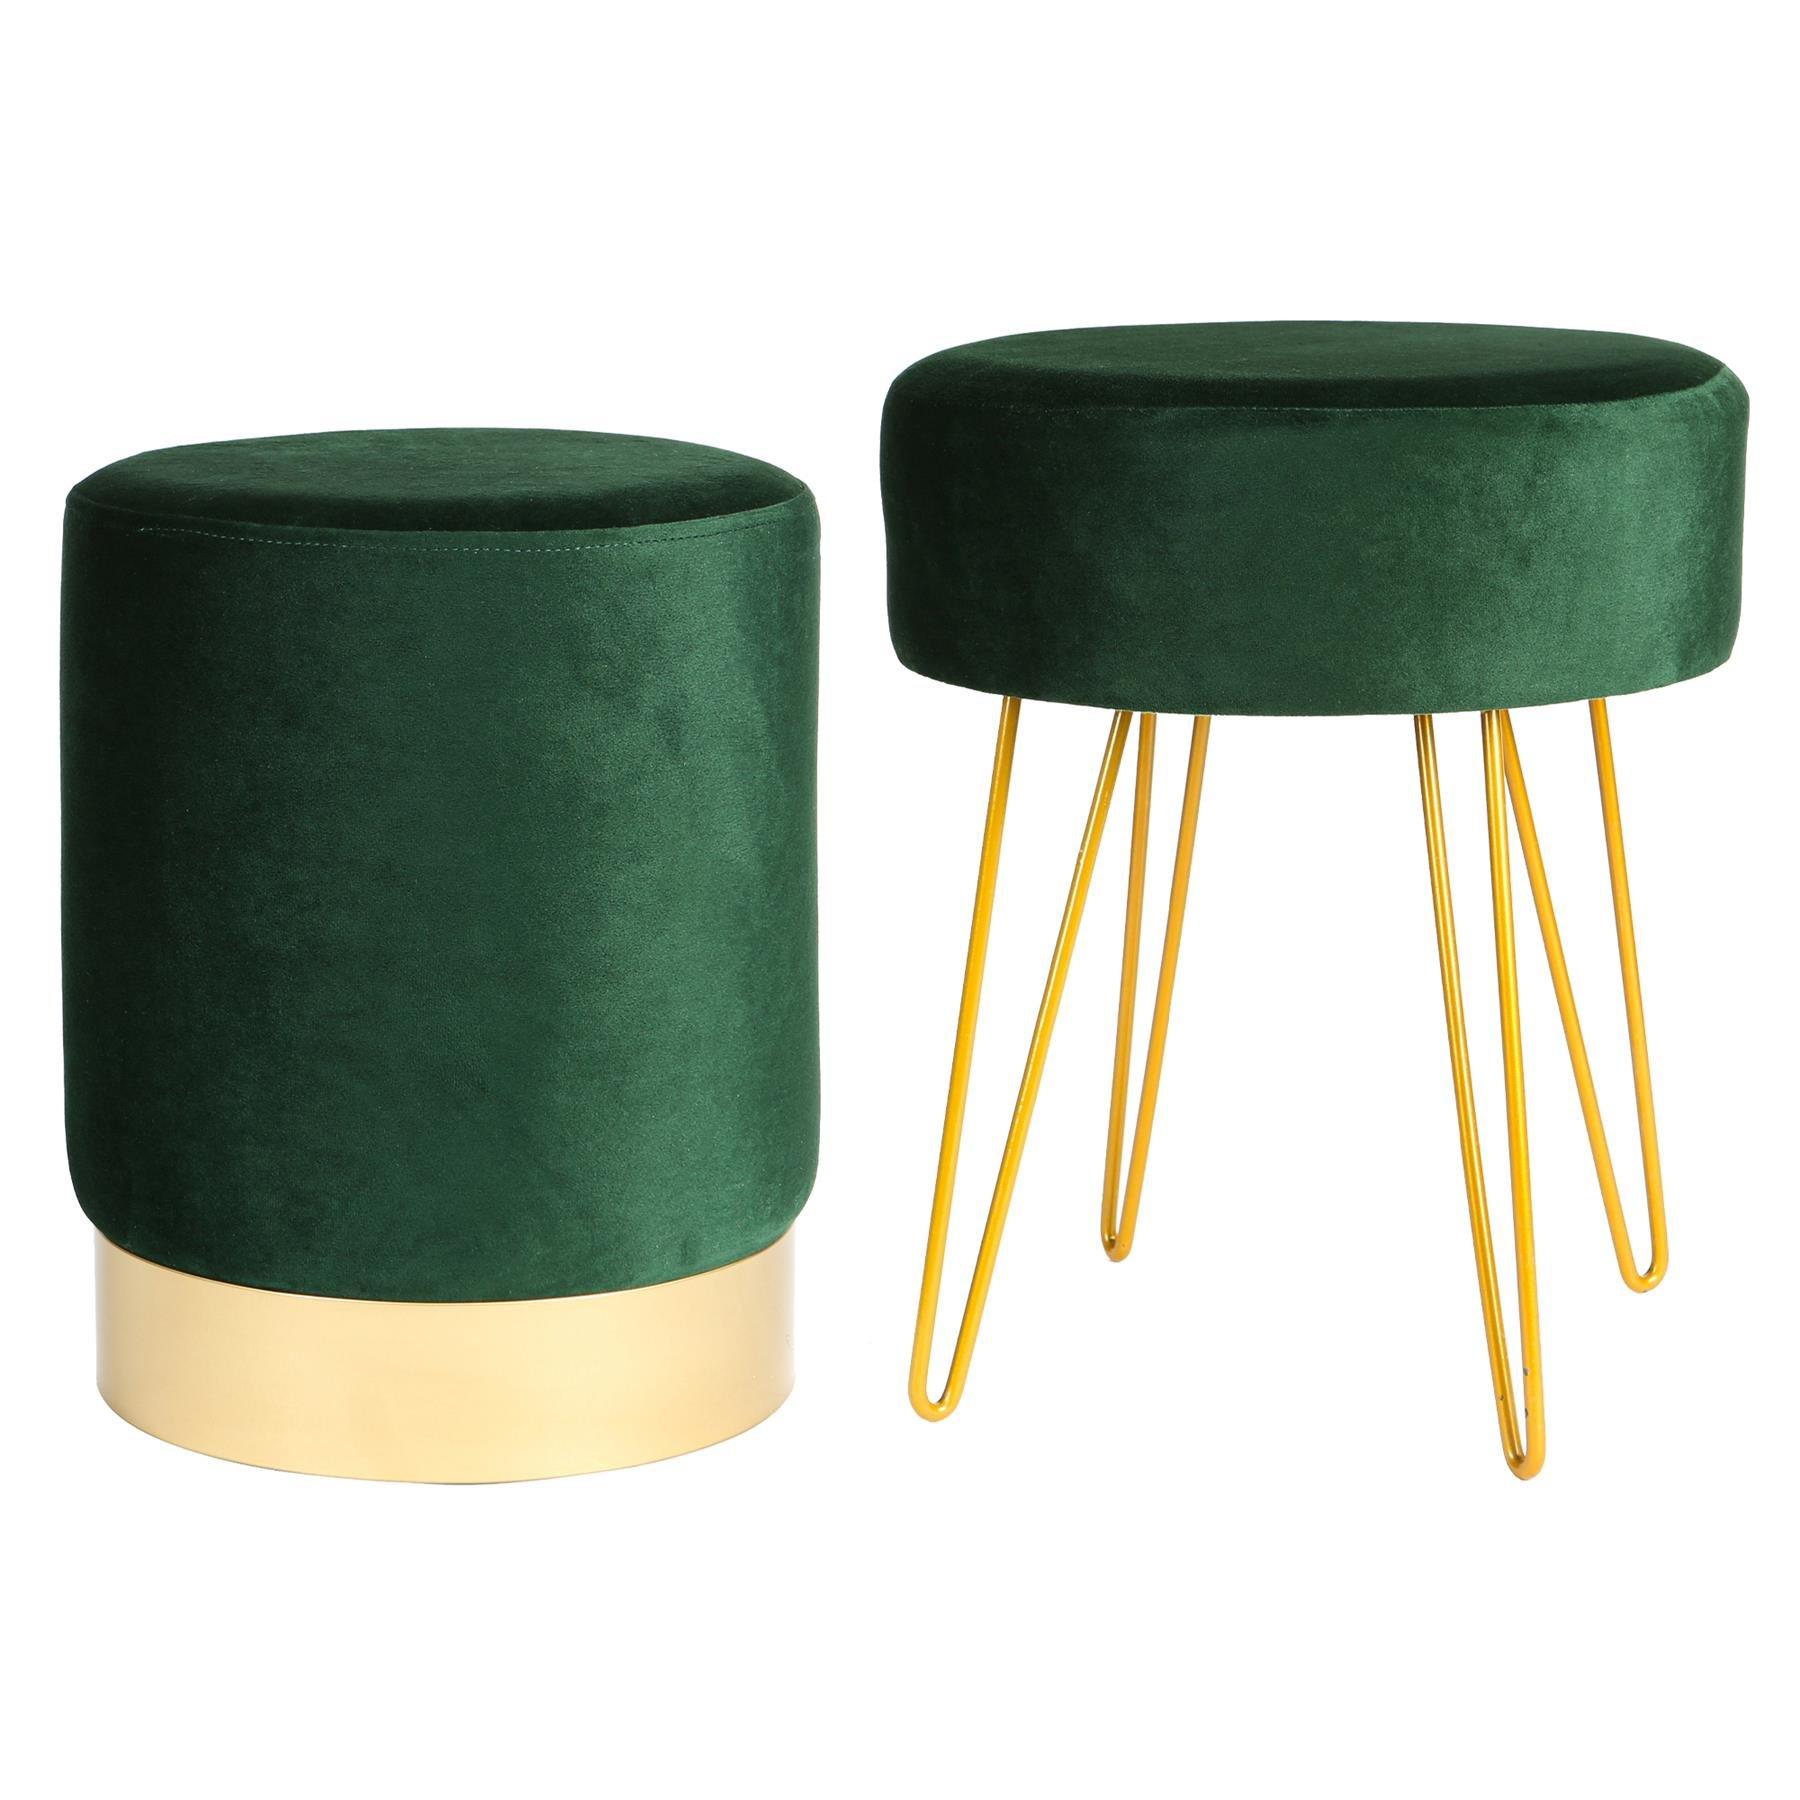 Harbour Housewares  2 Piece Round Velvet Footstools Set - Luxe Living Room Bedroom Dressing Table Accent Pouffe - Green